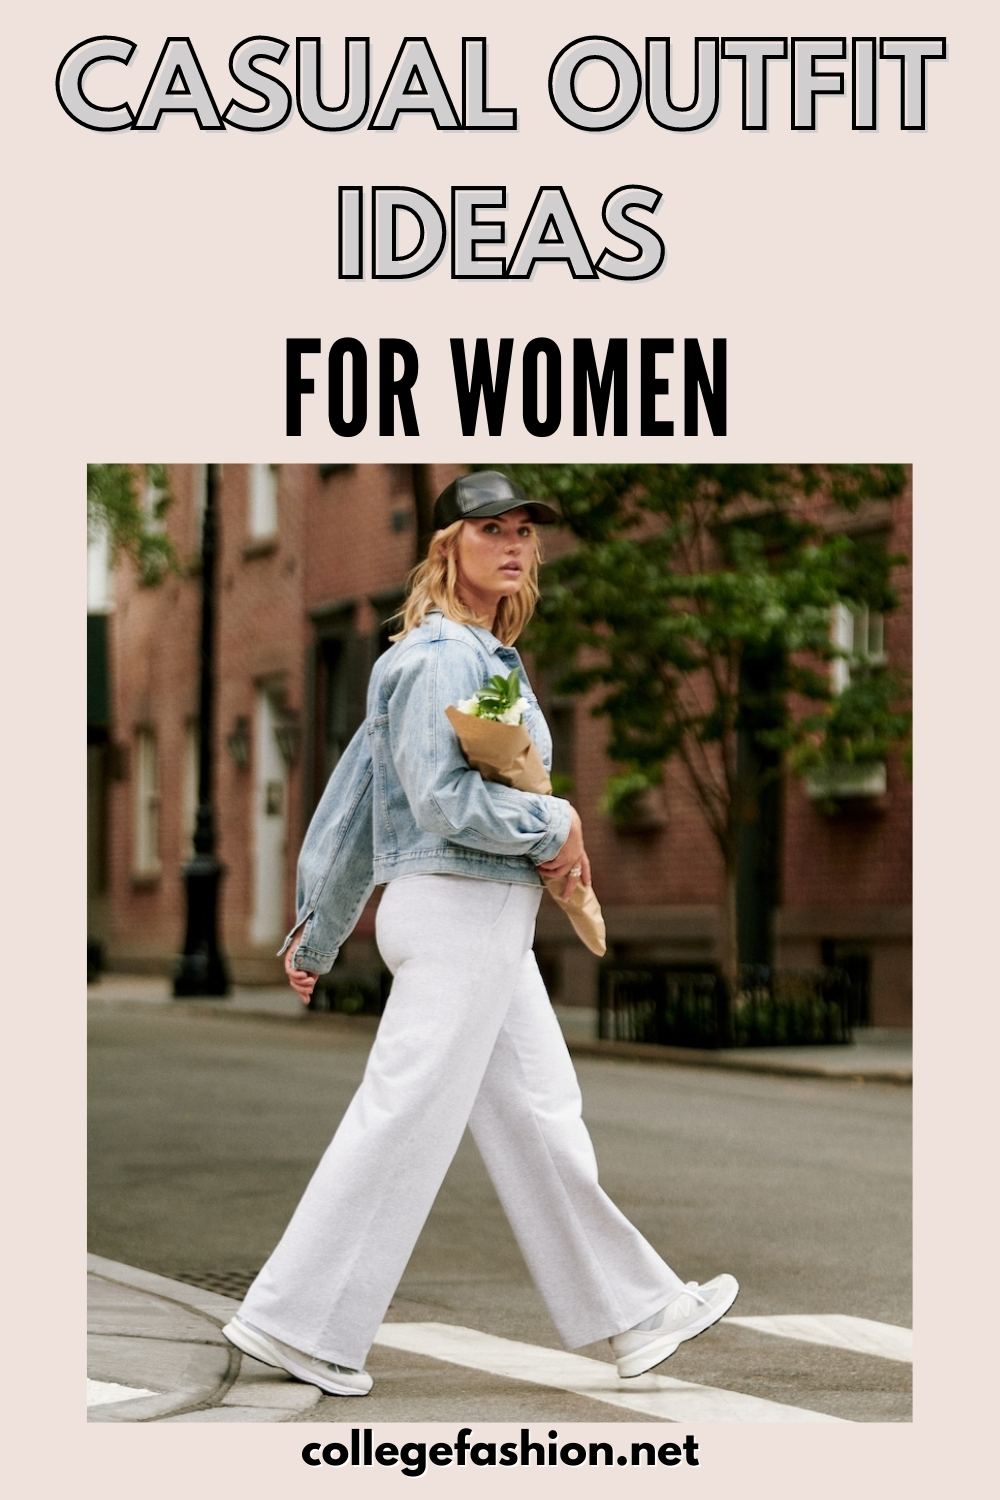 Our Favorite Casual Outfits for Women and How to Wear Them